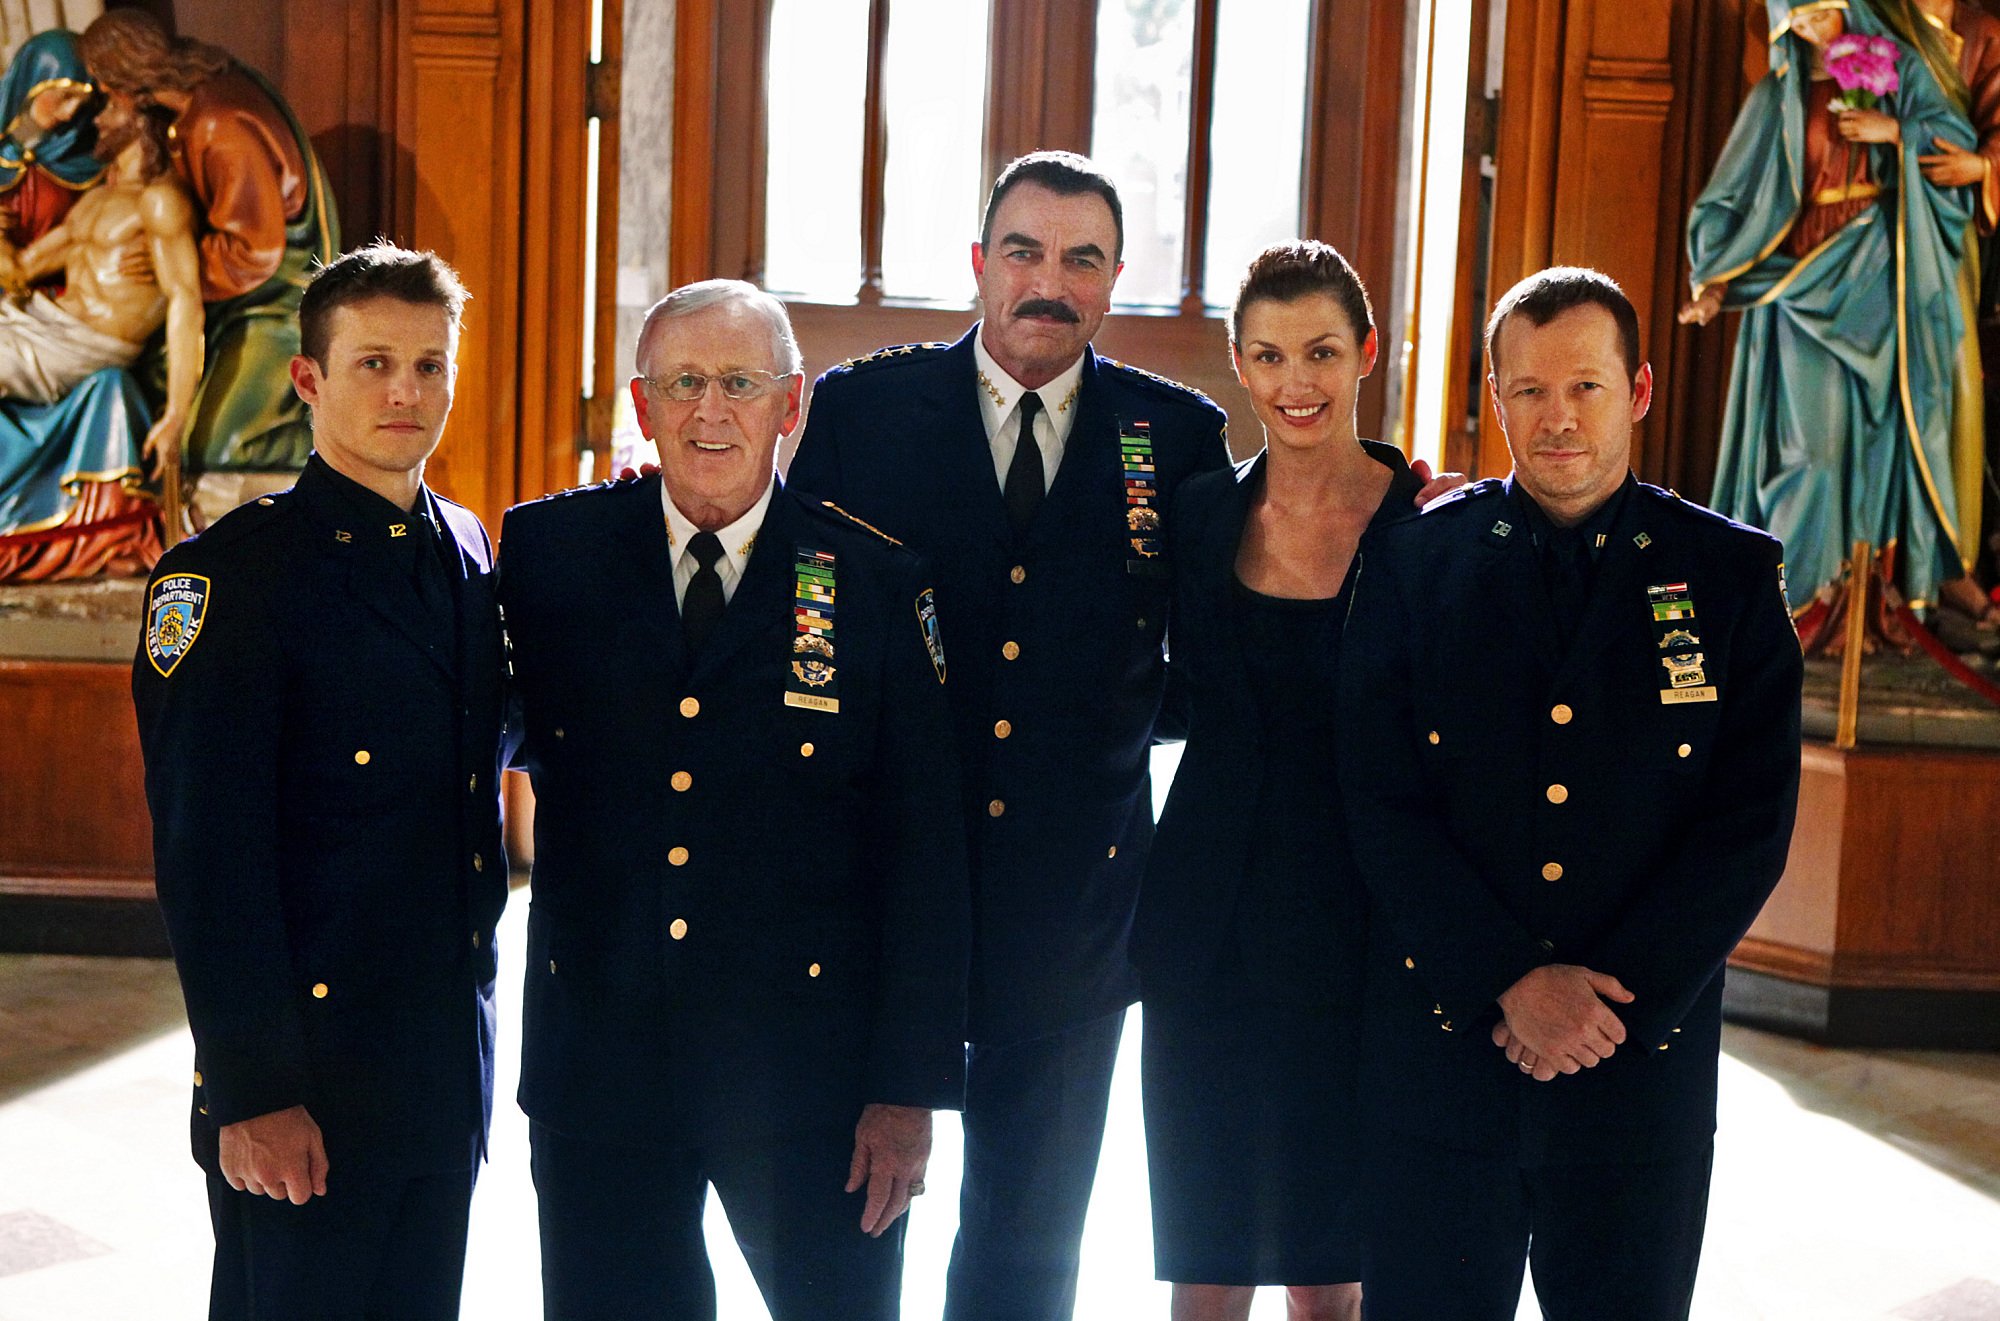 The cast of "Blue Bloods" pictured in their uniforms for an episode called "Officer Down." | Photo: Getty Images 